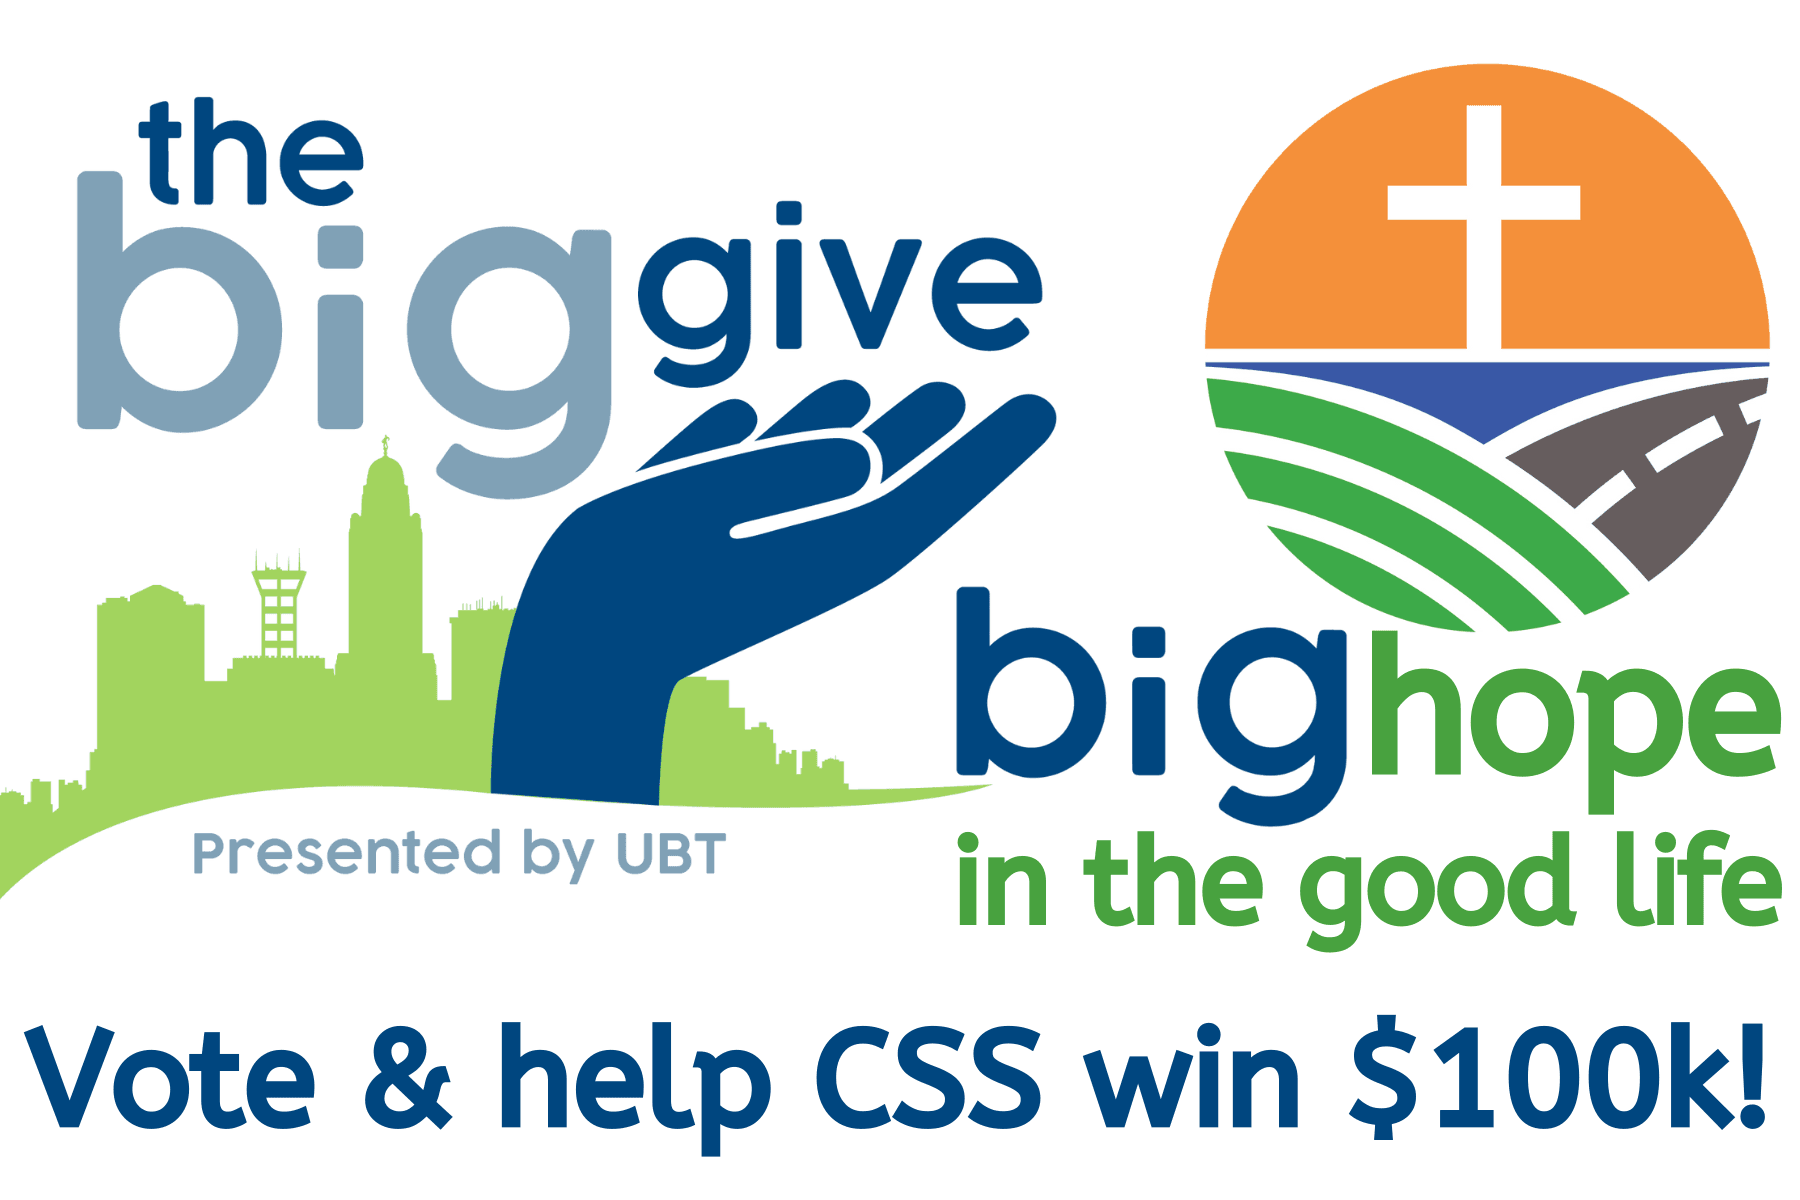 Help CSS bring $100k in HOPE IN THE GOOD LIFE to Lincoln families in need!